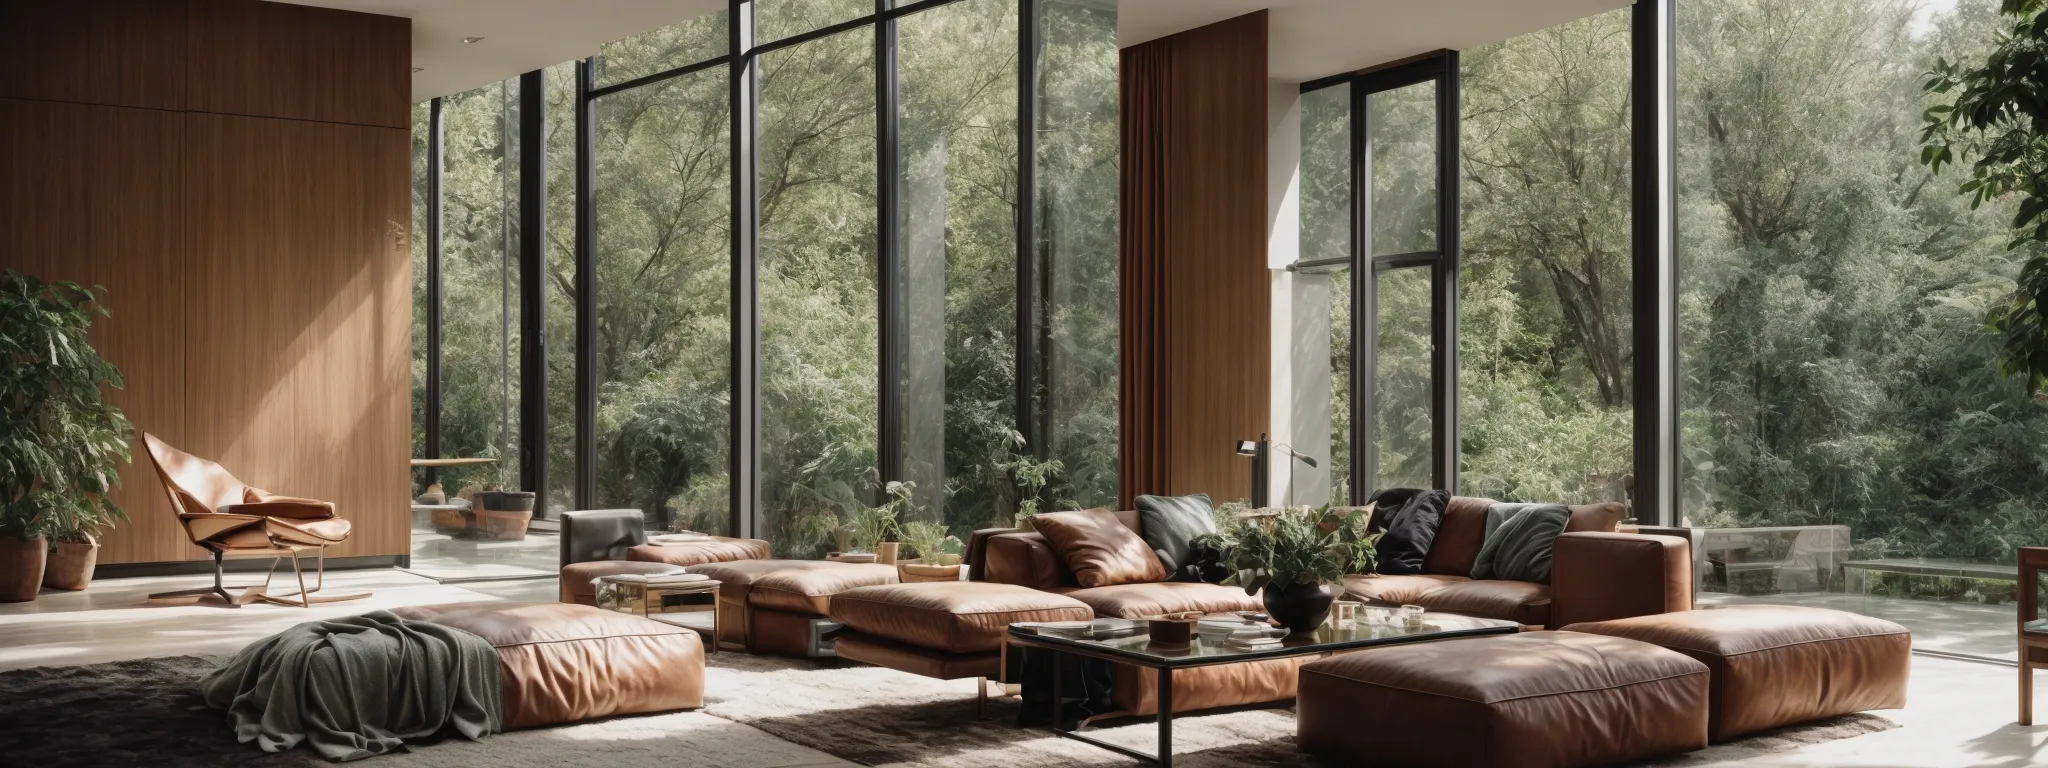 a modern, sleek living room bathed in natural light filtering through large, energy-efficient glass windows with a view of greenery outside.